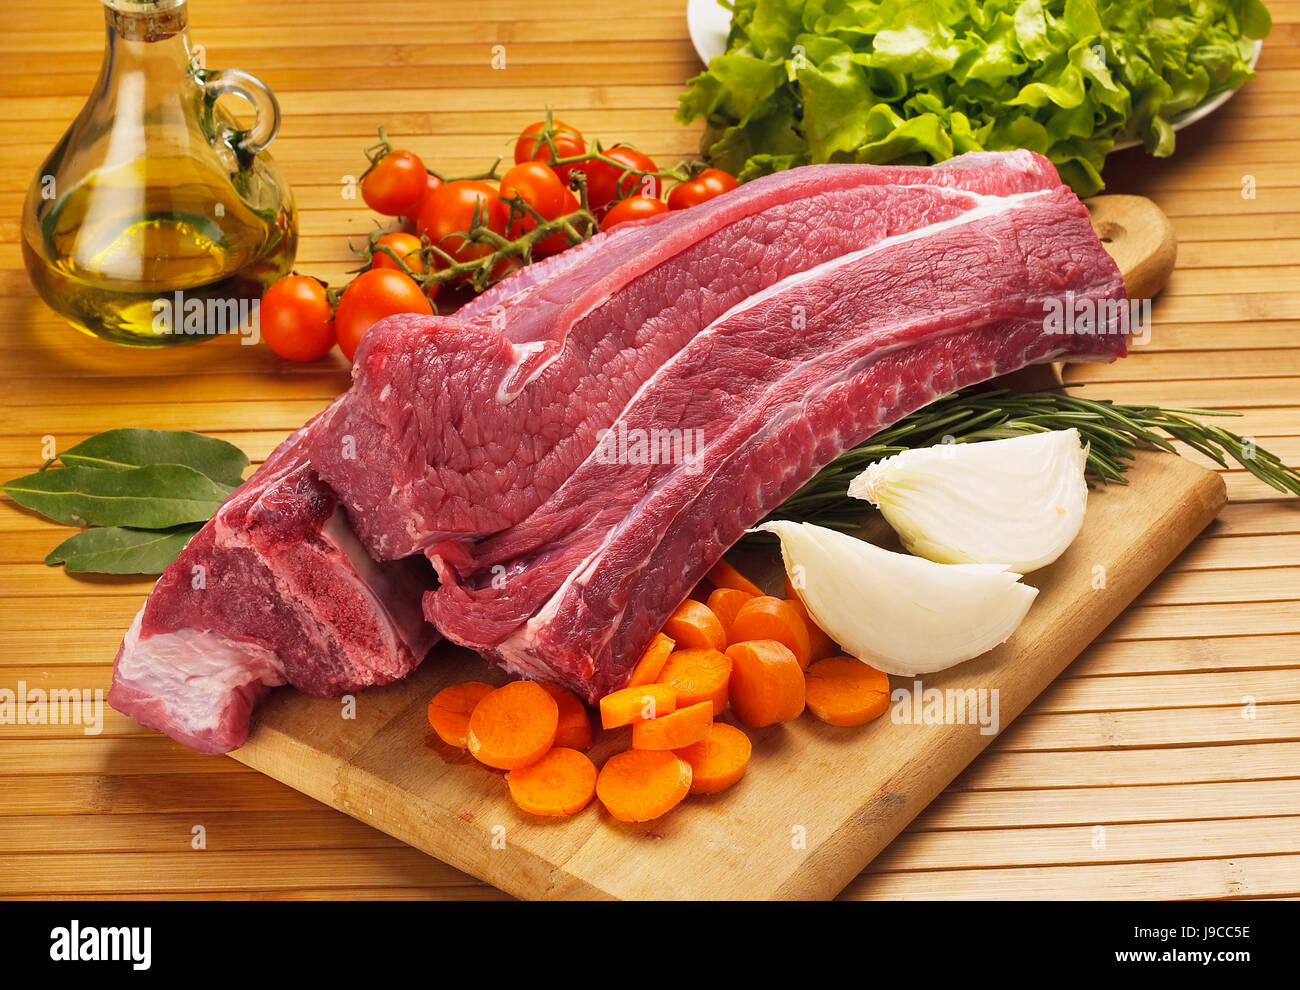 La nourriture, aliment, grill, barbecue, barbecue, steak, de la viande, nourriture, aliment, conseil, Banque D'Images